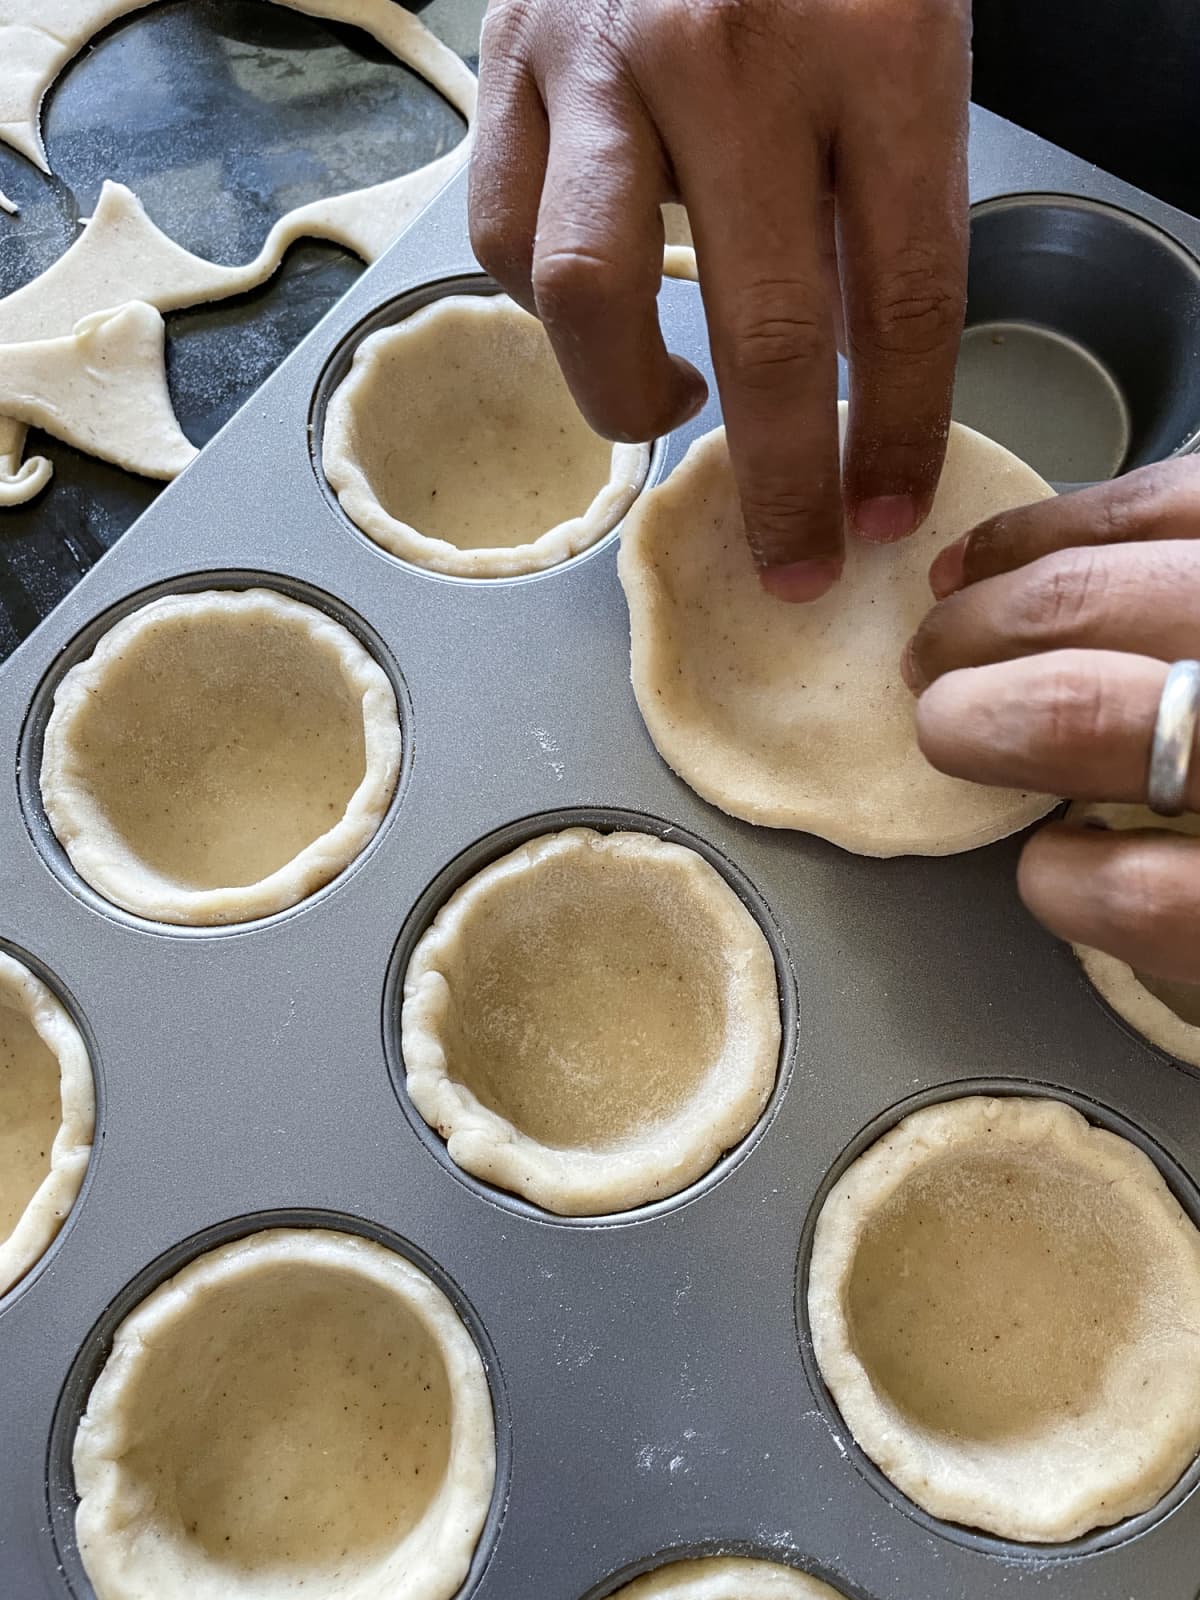 Hands placing pastry crust in a muffin tray